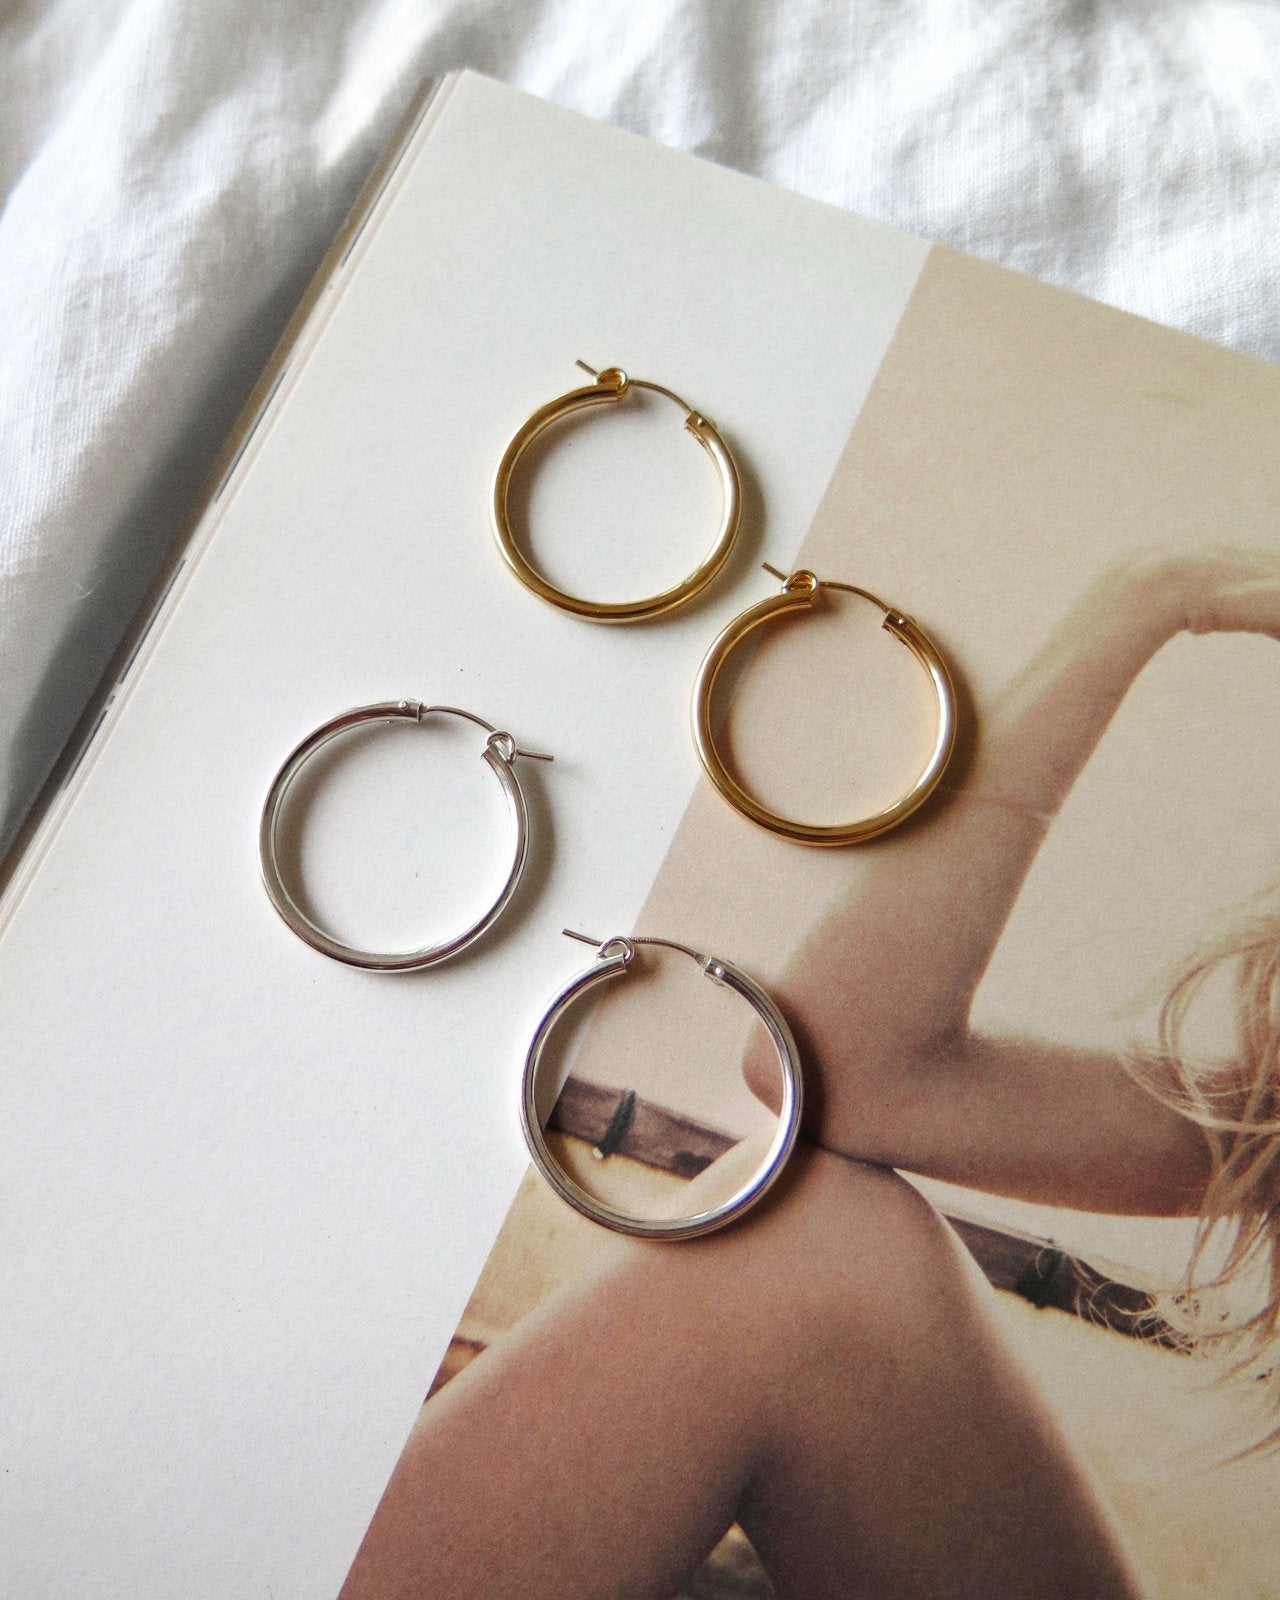 Load image into Gallery viewer, THICK HOOP EARRINGS - 14k Rose Gold Fill - The Littl - 14k Rose Gold Fill - 12mm Earrings
